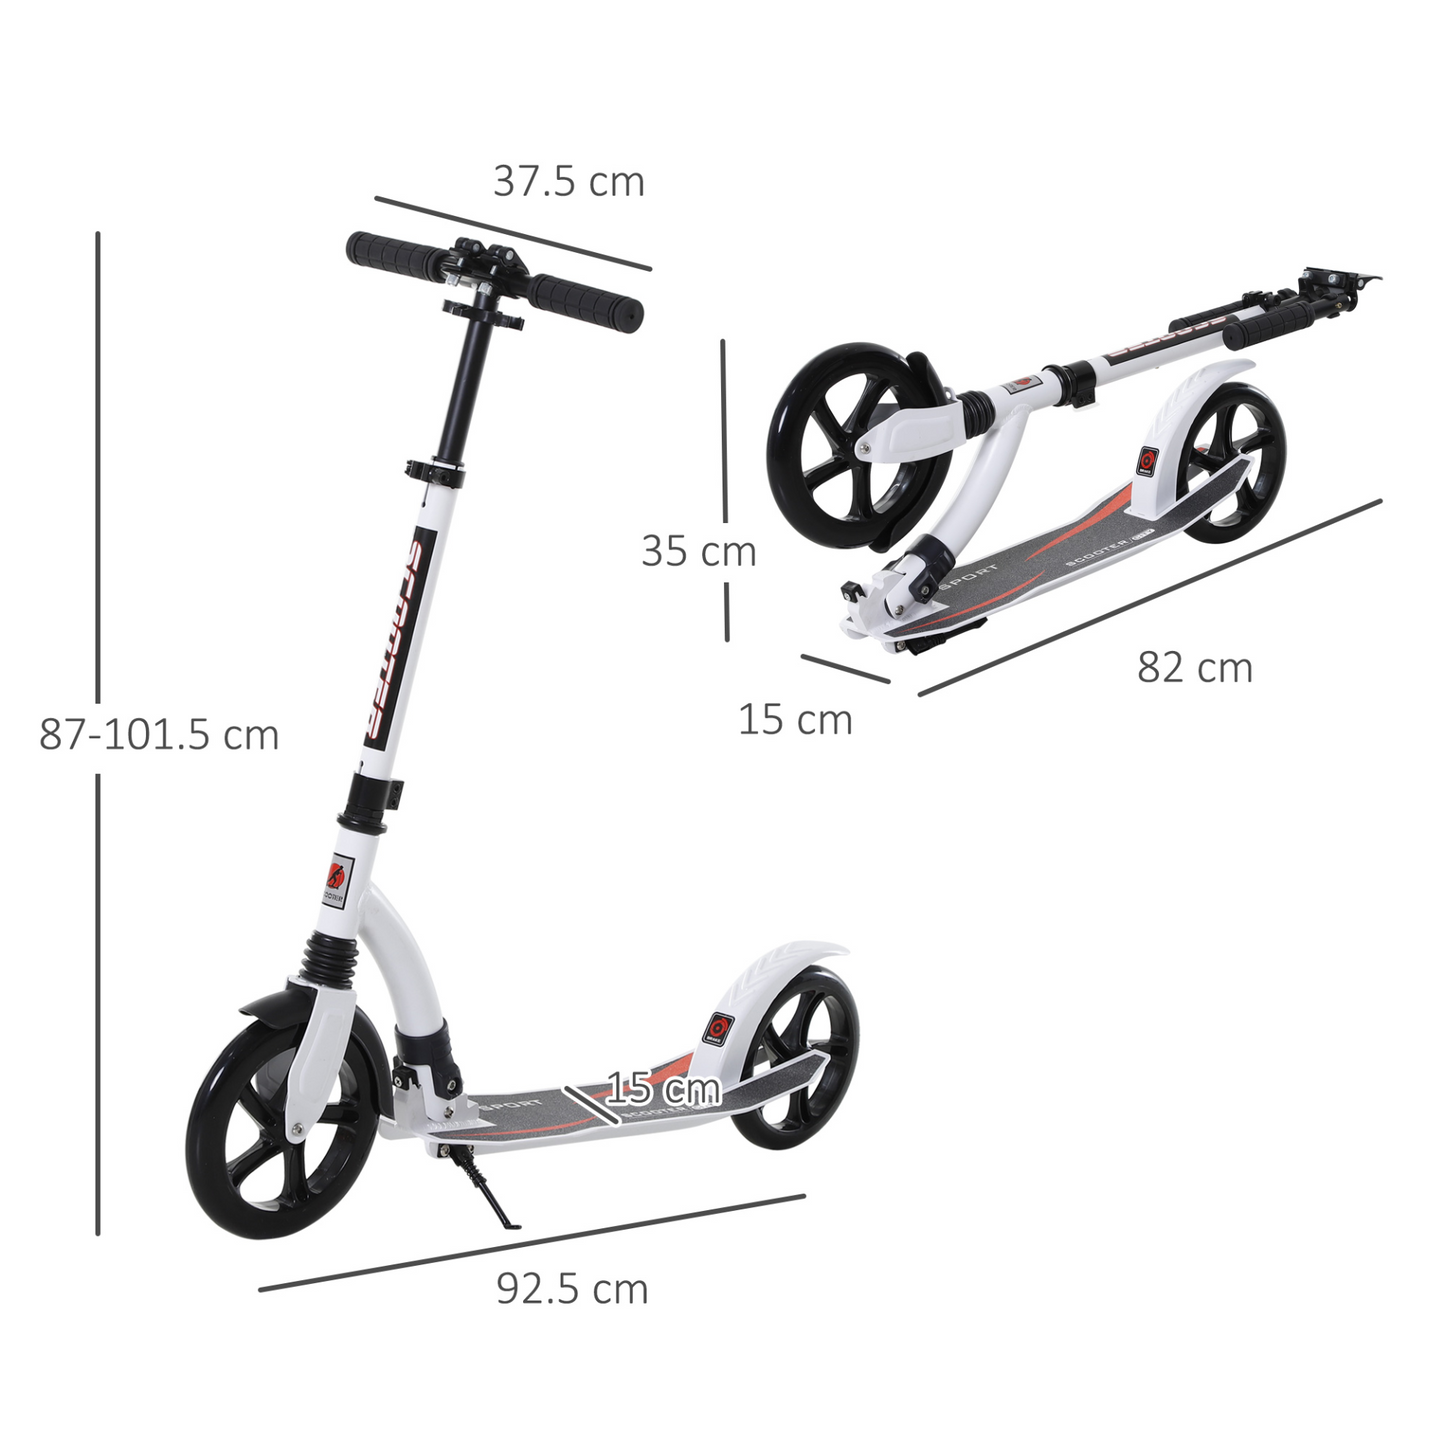 HOMCOM Teens Adult Kick Scooter w/ Shock Absorption Mechanism Foldable Adjustable Height Aluminium Frame Ride On Toy for 14+ - White